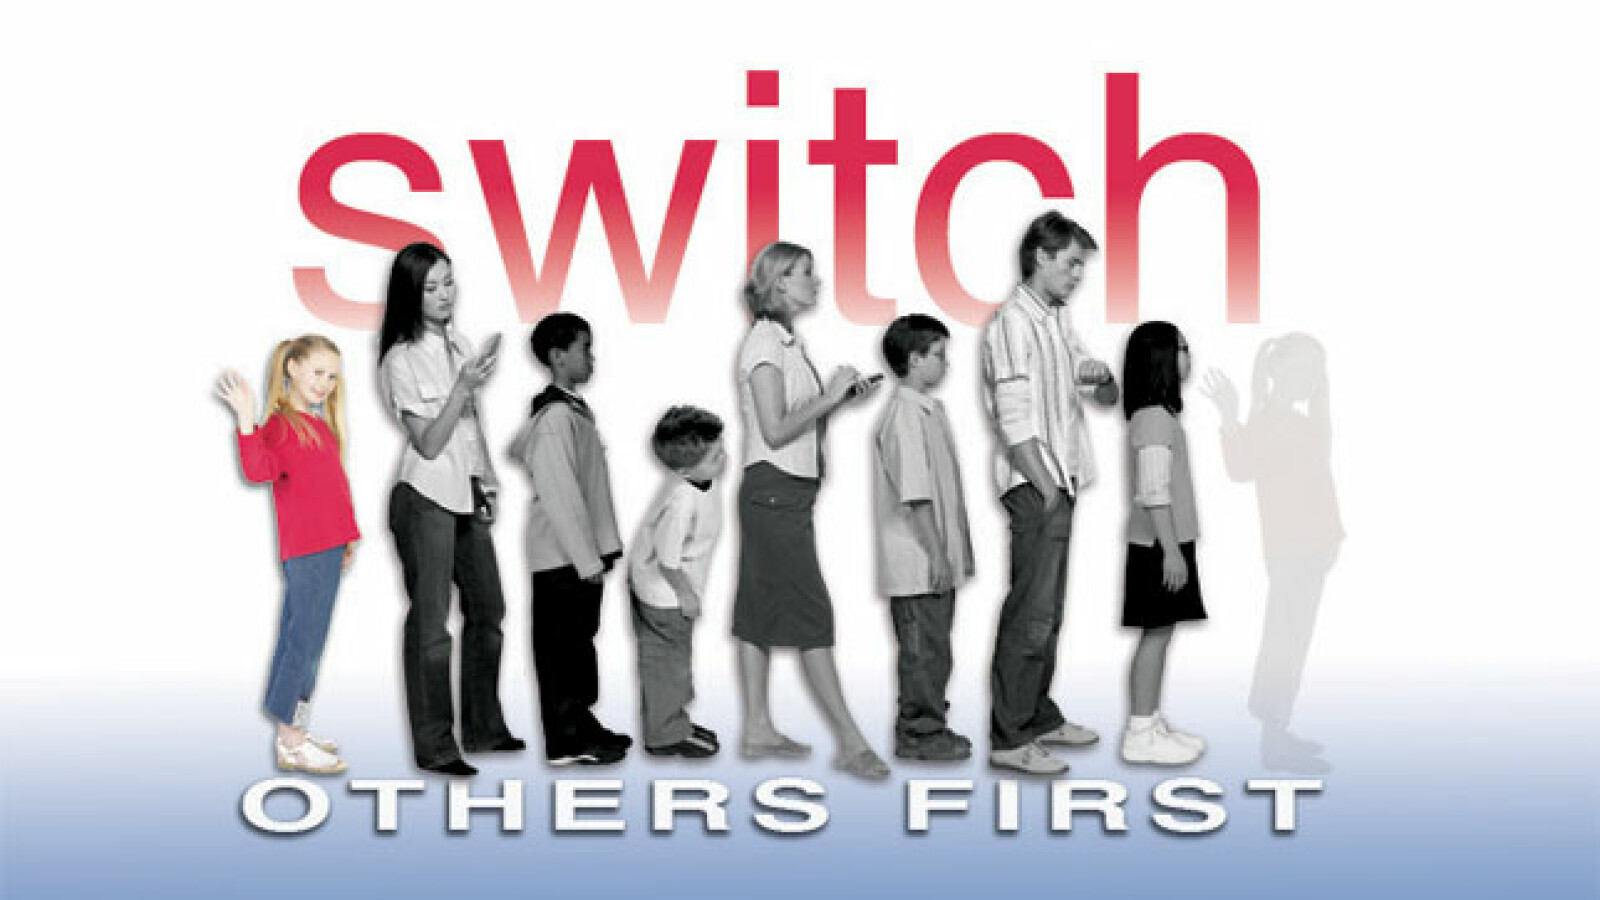 Switch - Others First